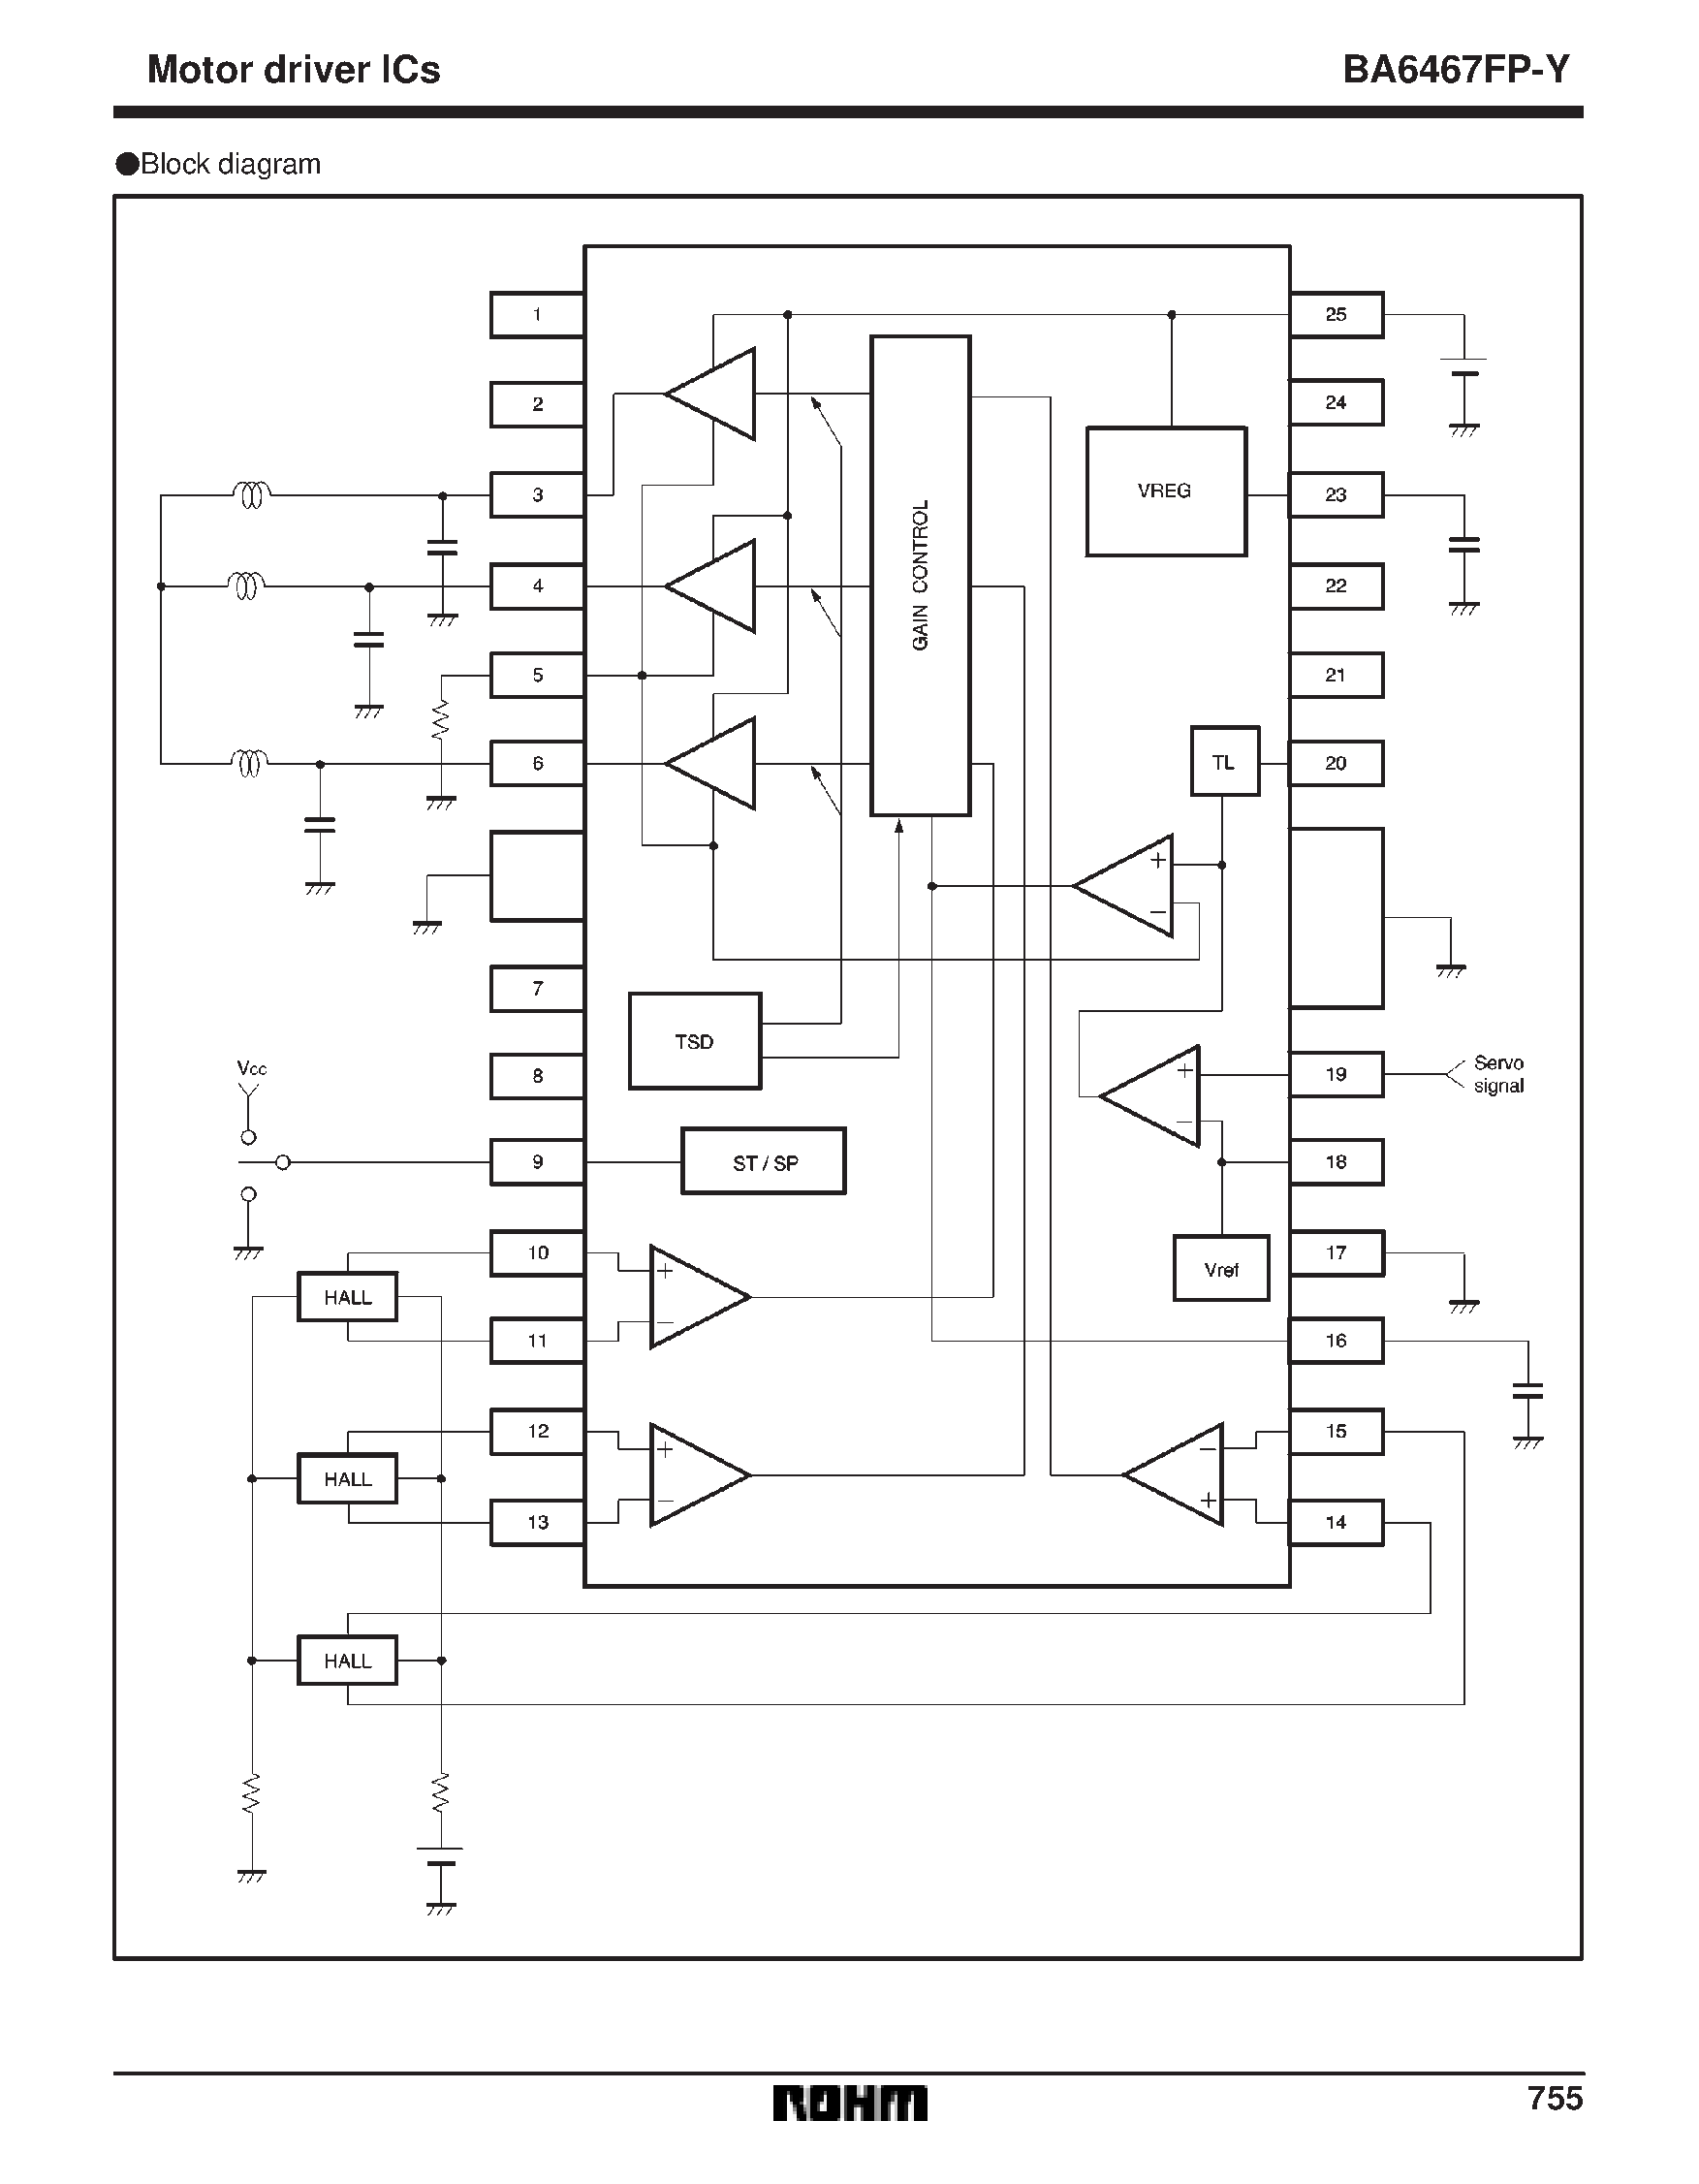 Datasheet BA6467FP-Y - 3-phase motor driver for VCR cylinders page 2